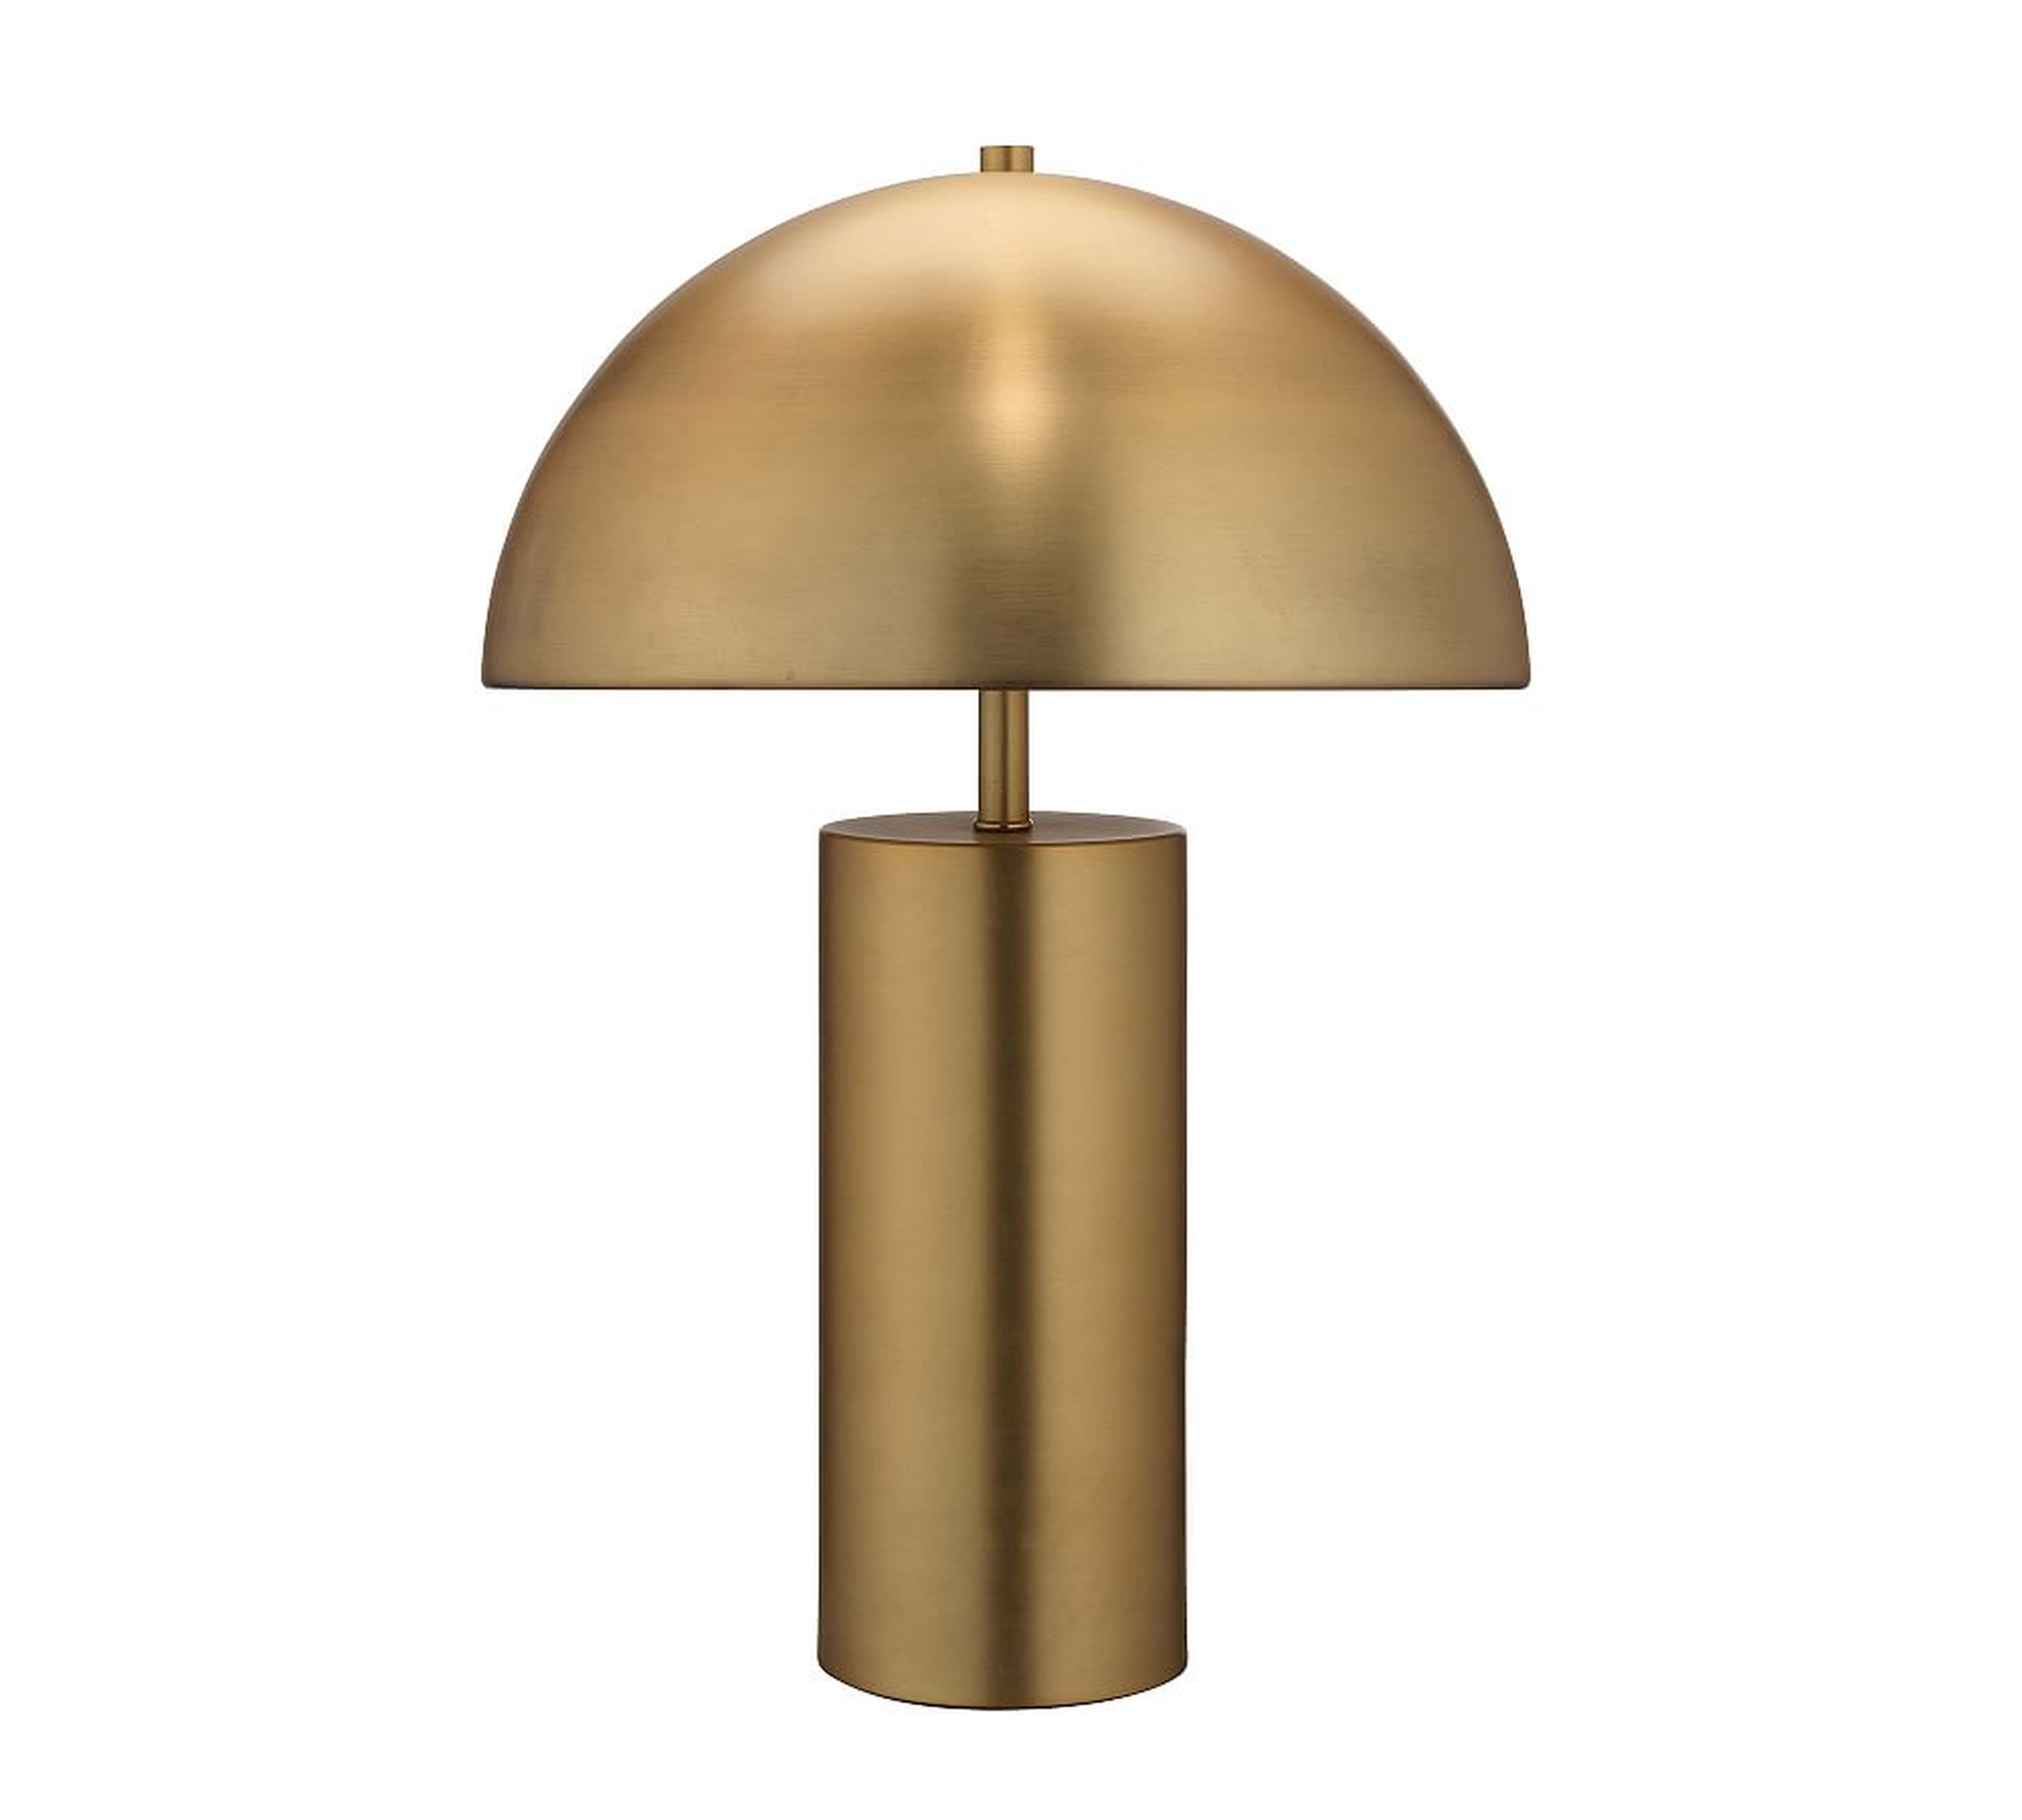 Edith Iron Table Lamp, Antique Brass - Pottery Barn